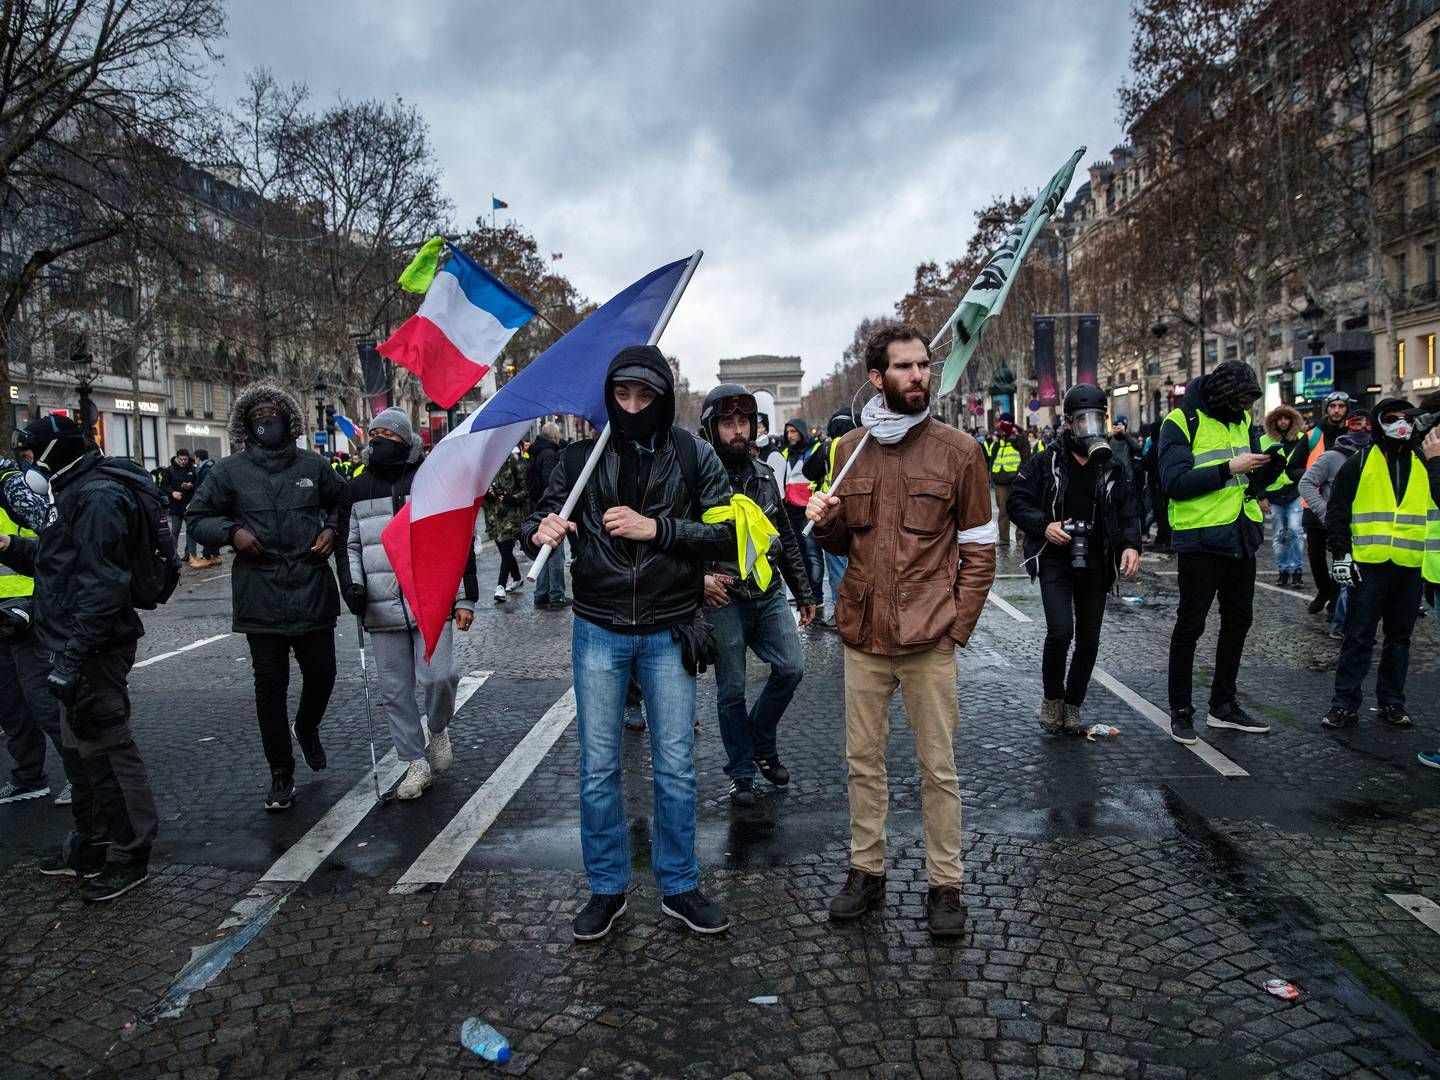 Rising fuel prices in France in 2018 led to demonstrations and the "Yellow Vests" movement. | Foto: Jacob Ehrbahn